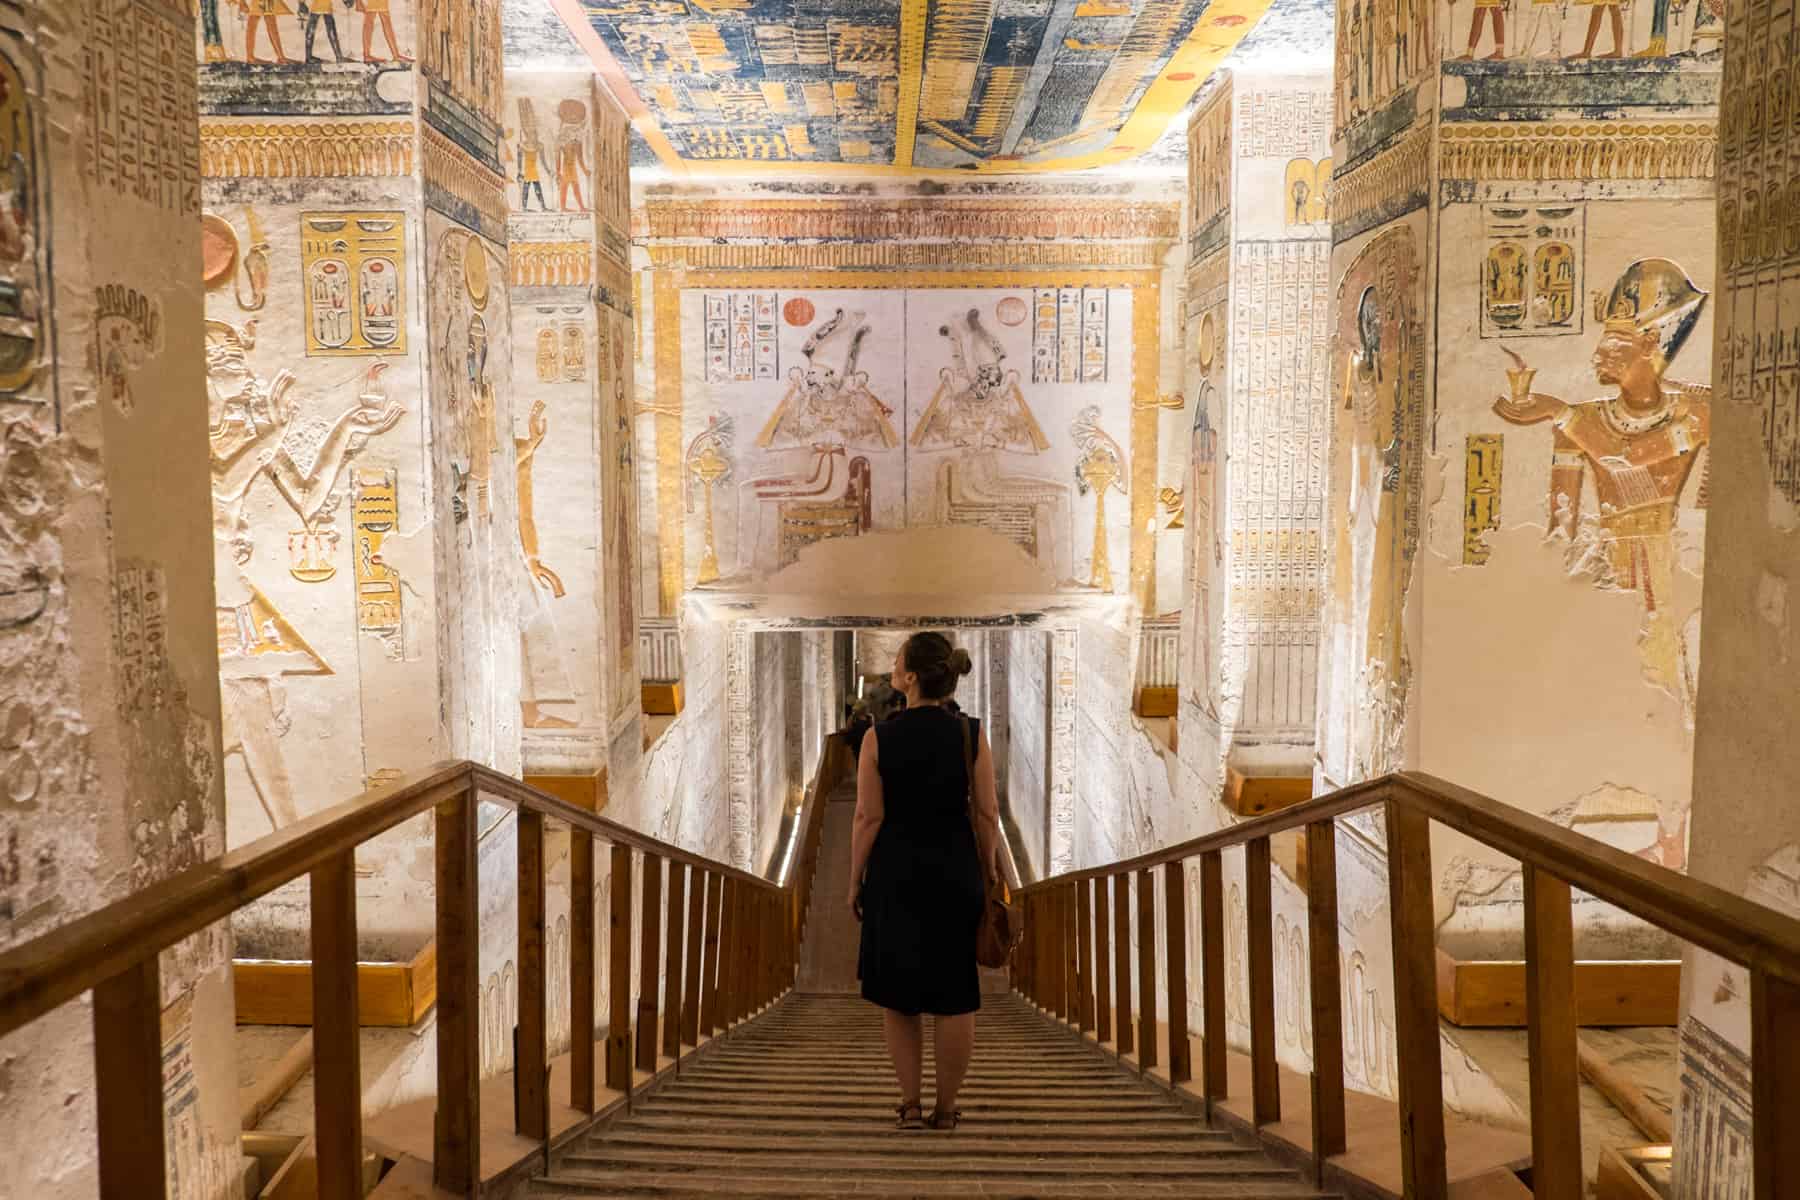 A woman walks down a wooden platform inside a tomb in the Valley of the Kings in Egypt, where every wall space and ceiling is filled with scripture and images